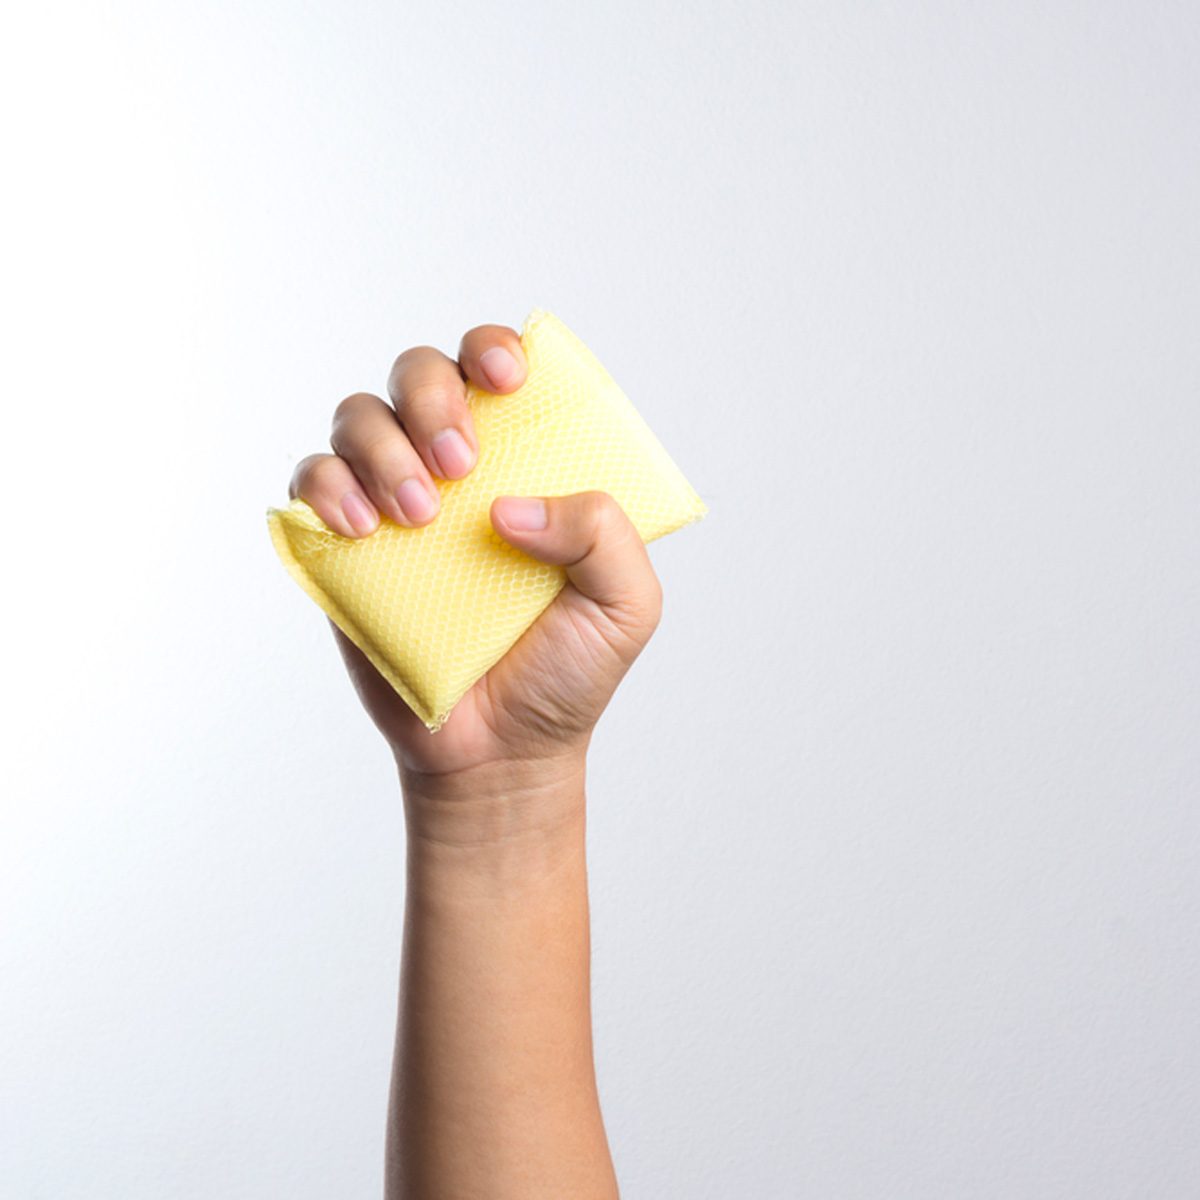 how to get the smell out of a sponge